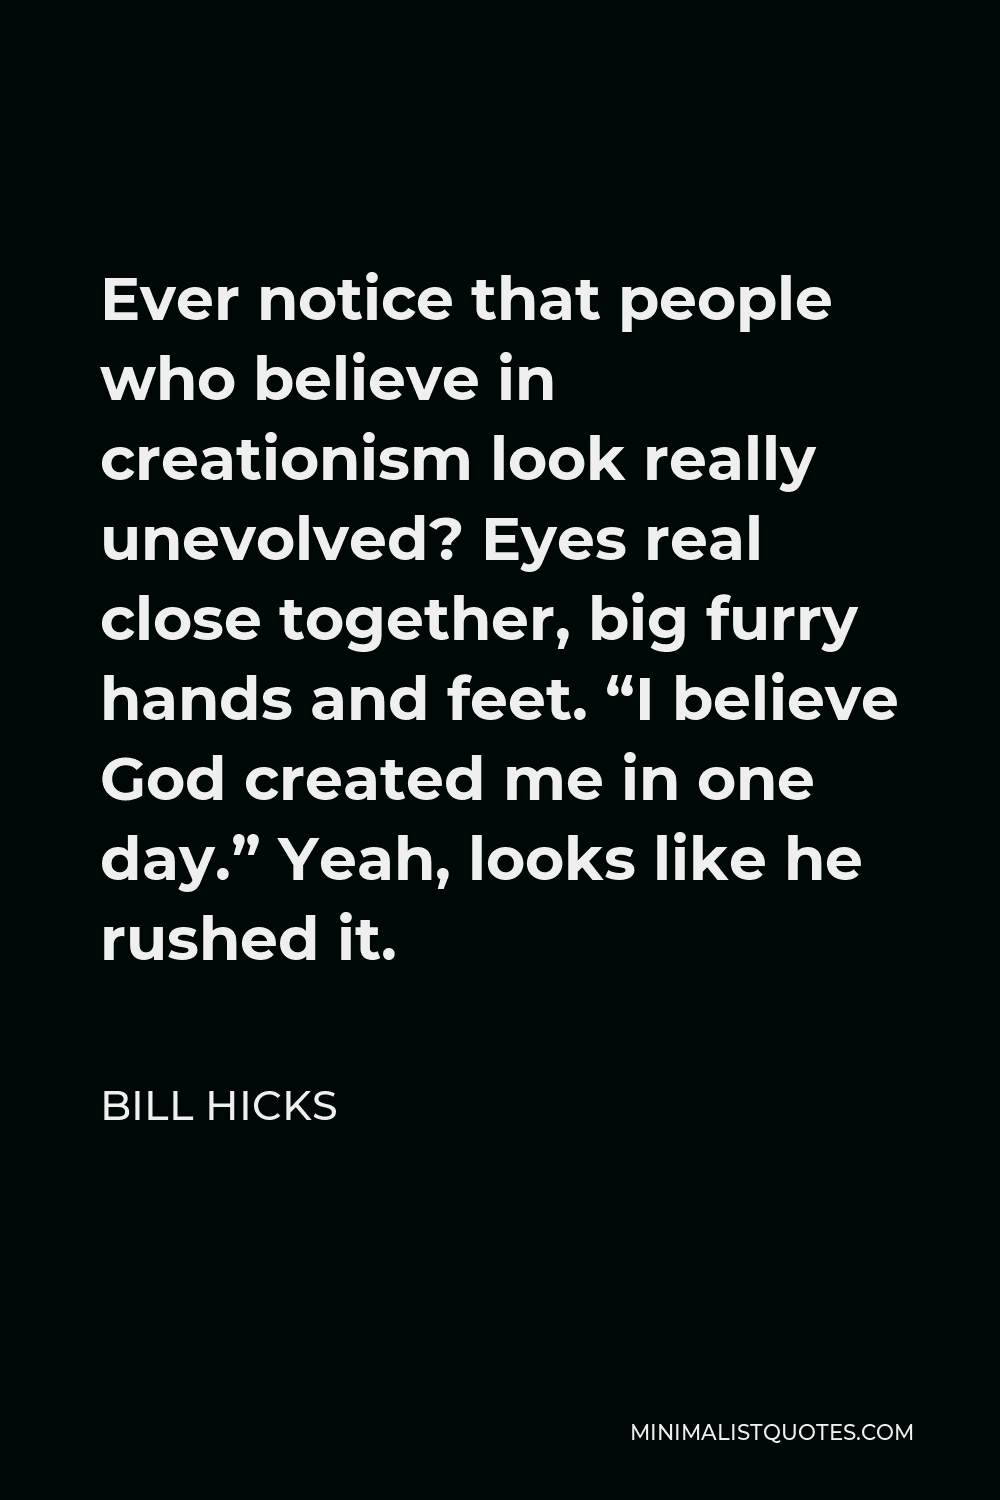 Bill Hicks Quote - Ever notice that people who believe in creationism look really unevolved? Eyes real close together, big furry hands and feet. “I believe God created me in one day.” Yeah, looks like he rushed it.